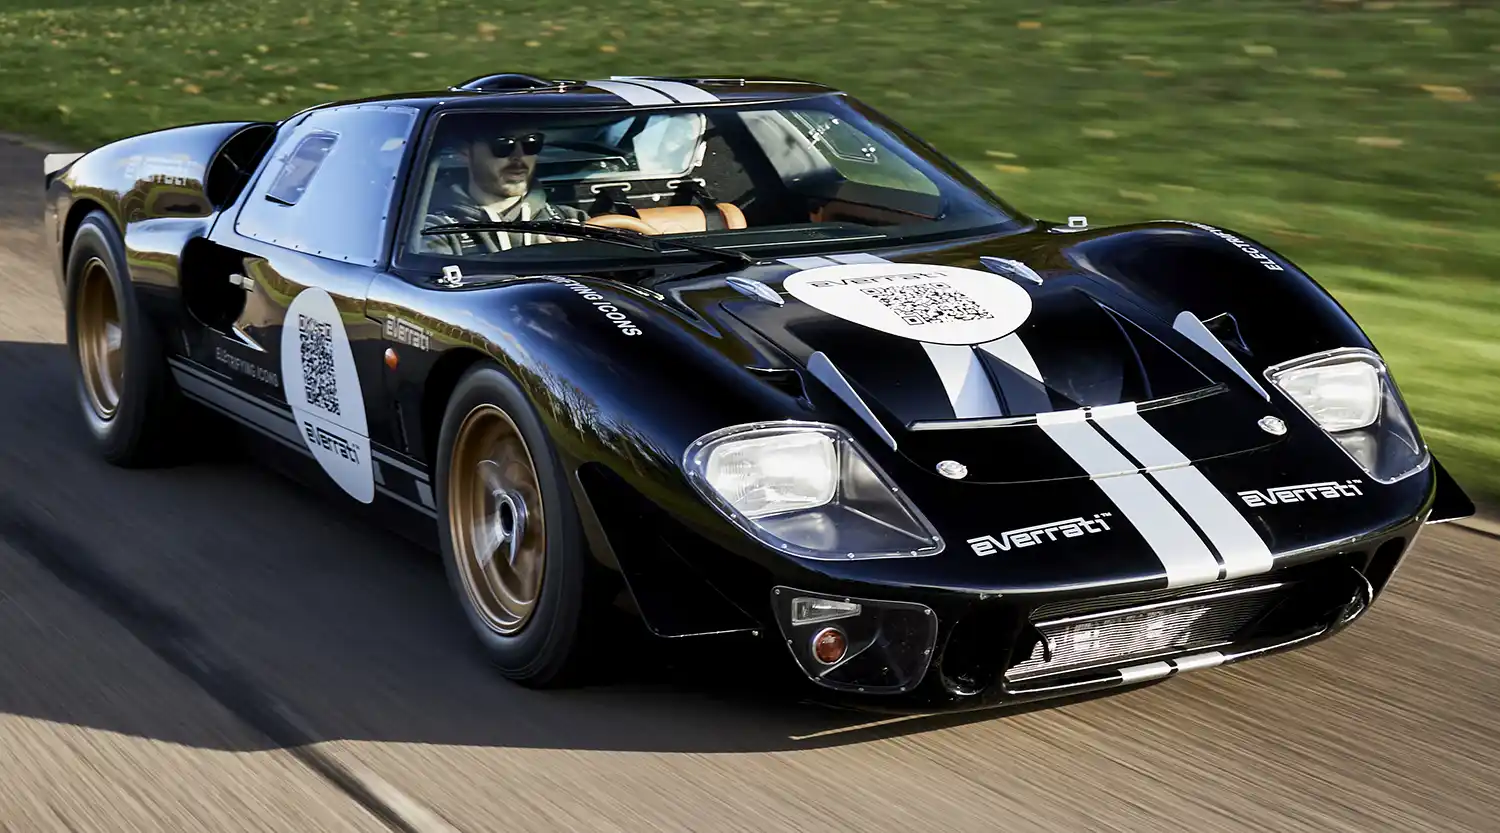 Legendary GT40 goes electric